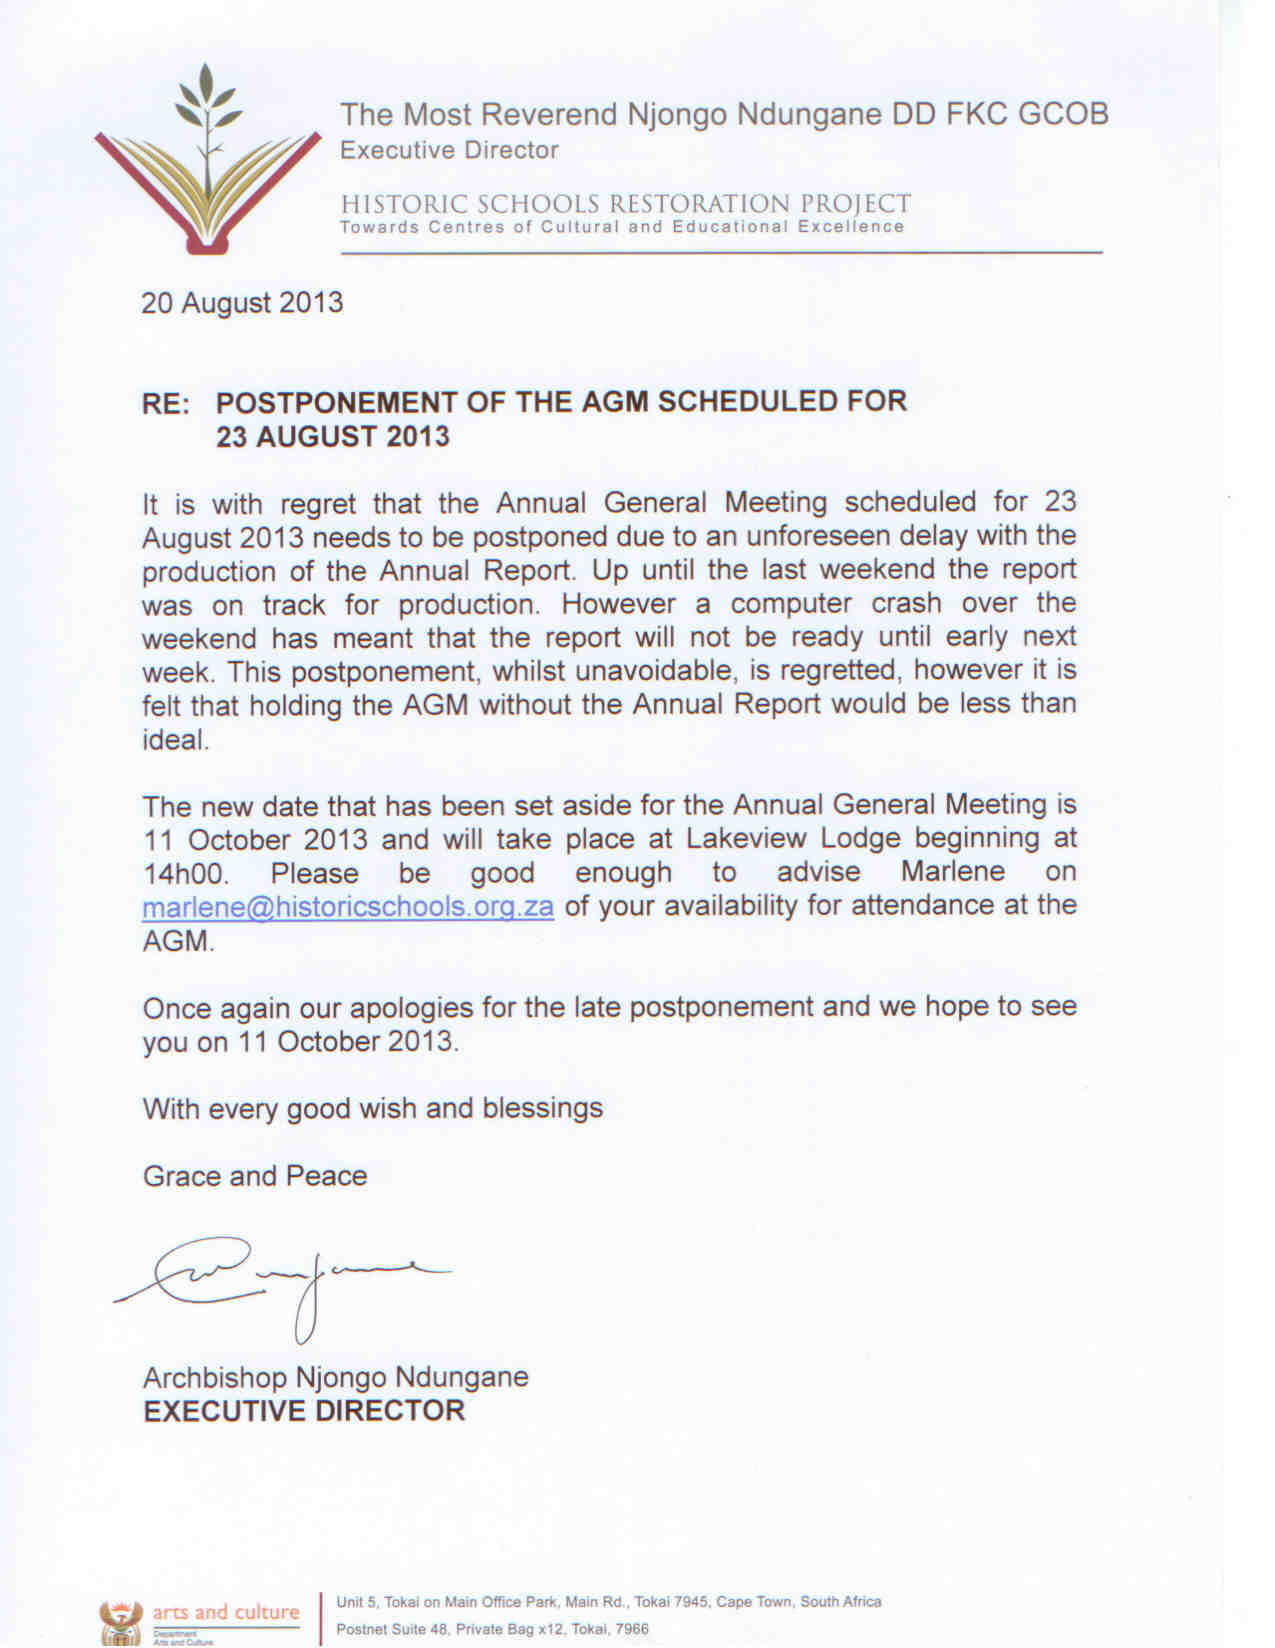 Click the image for a view of: POSTPONEMENT OF AGM SCHEDULED FOR 23 AUGUST 2013